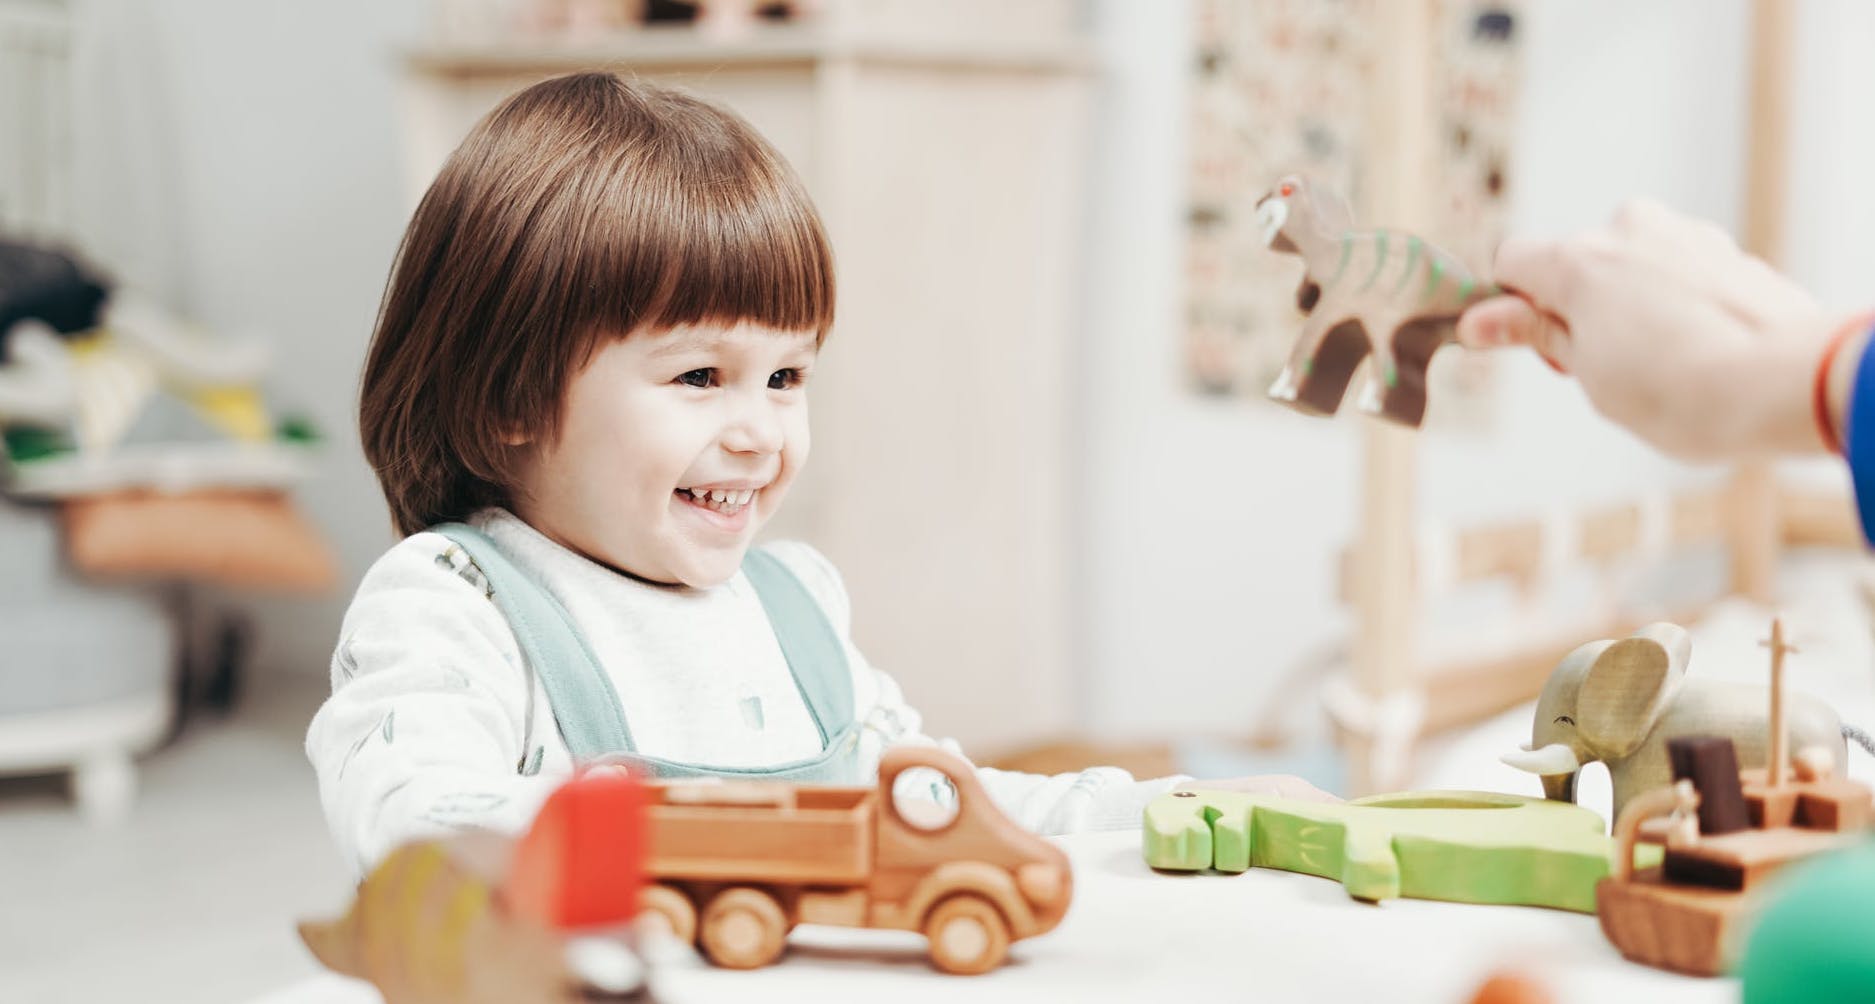 Image of a child in preschool